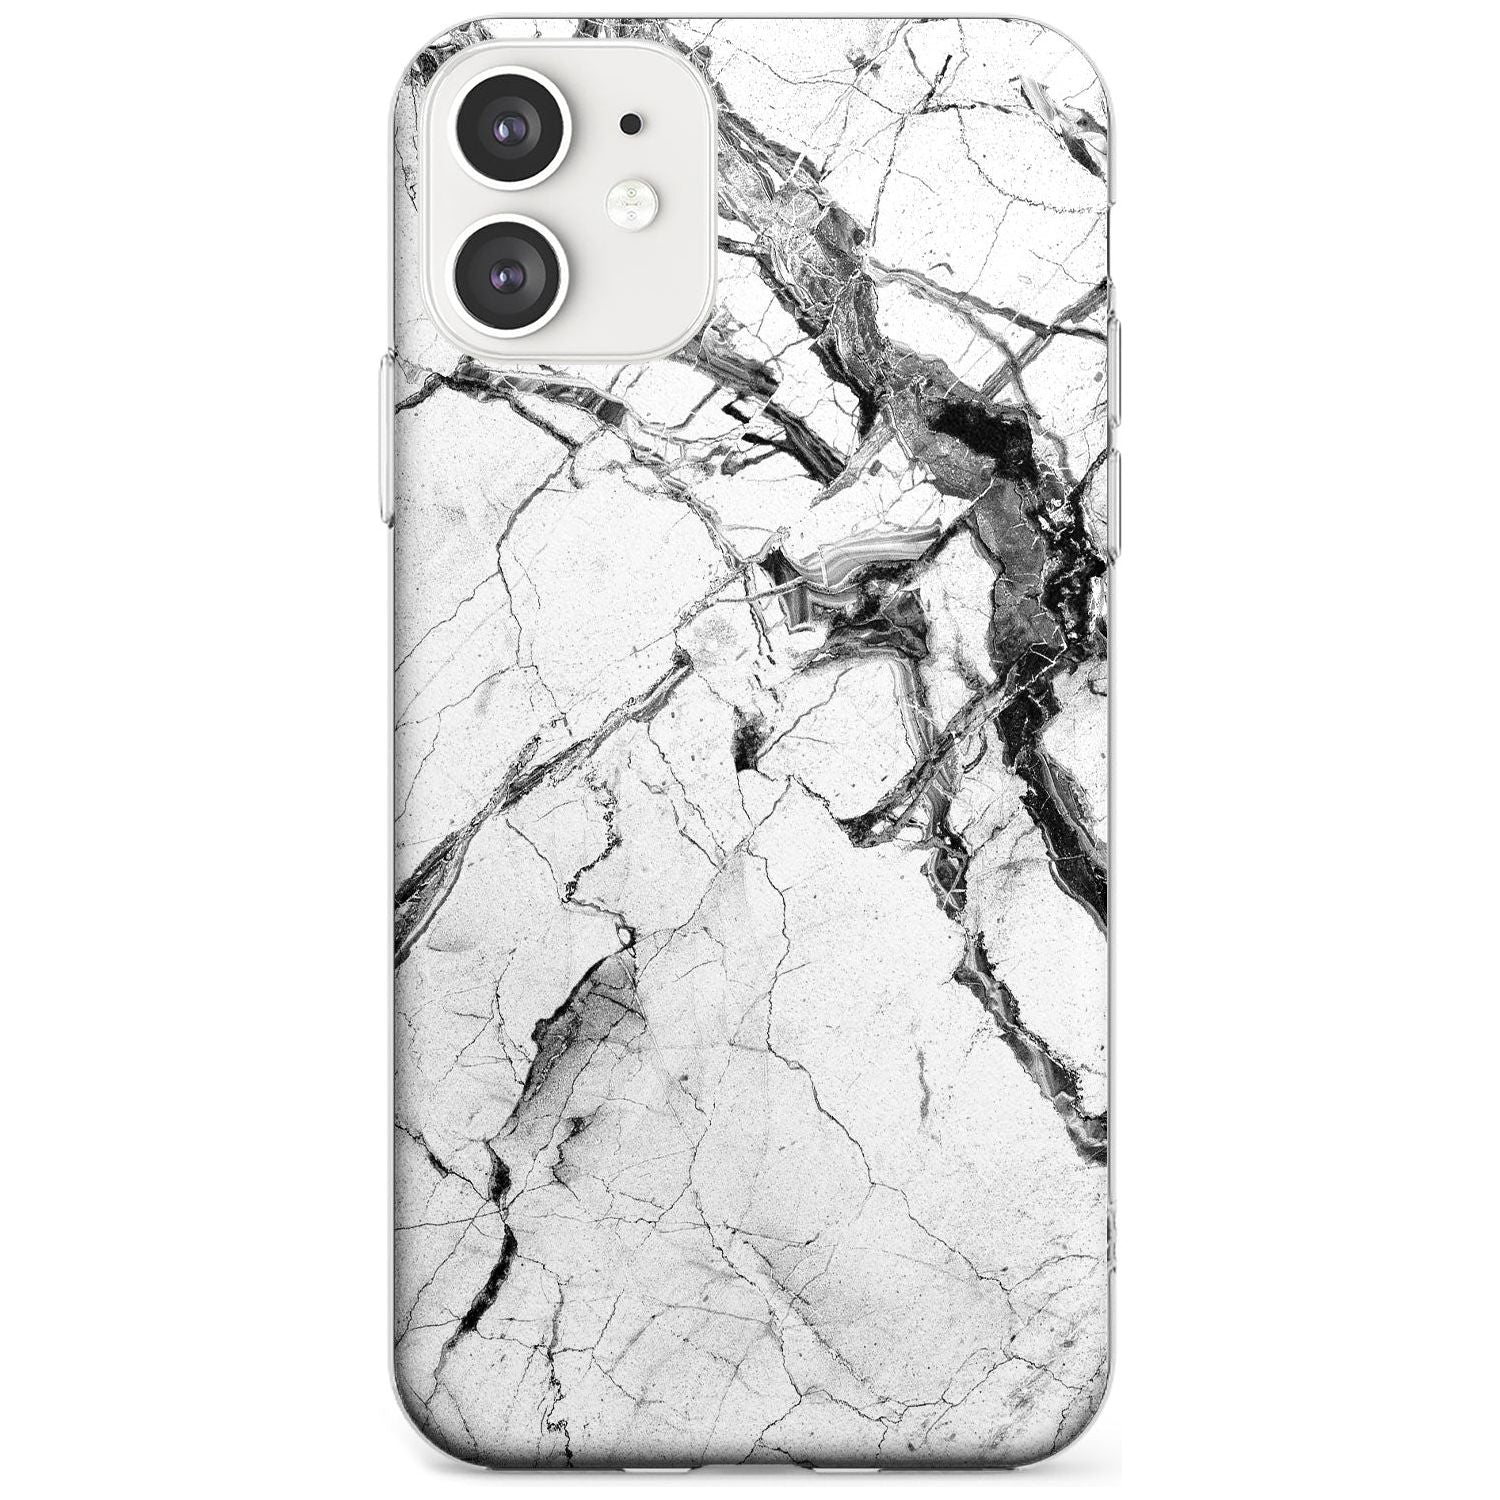 Black & White Stormy Marble Slim TPU Phone Case for iPhone 11